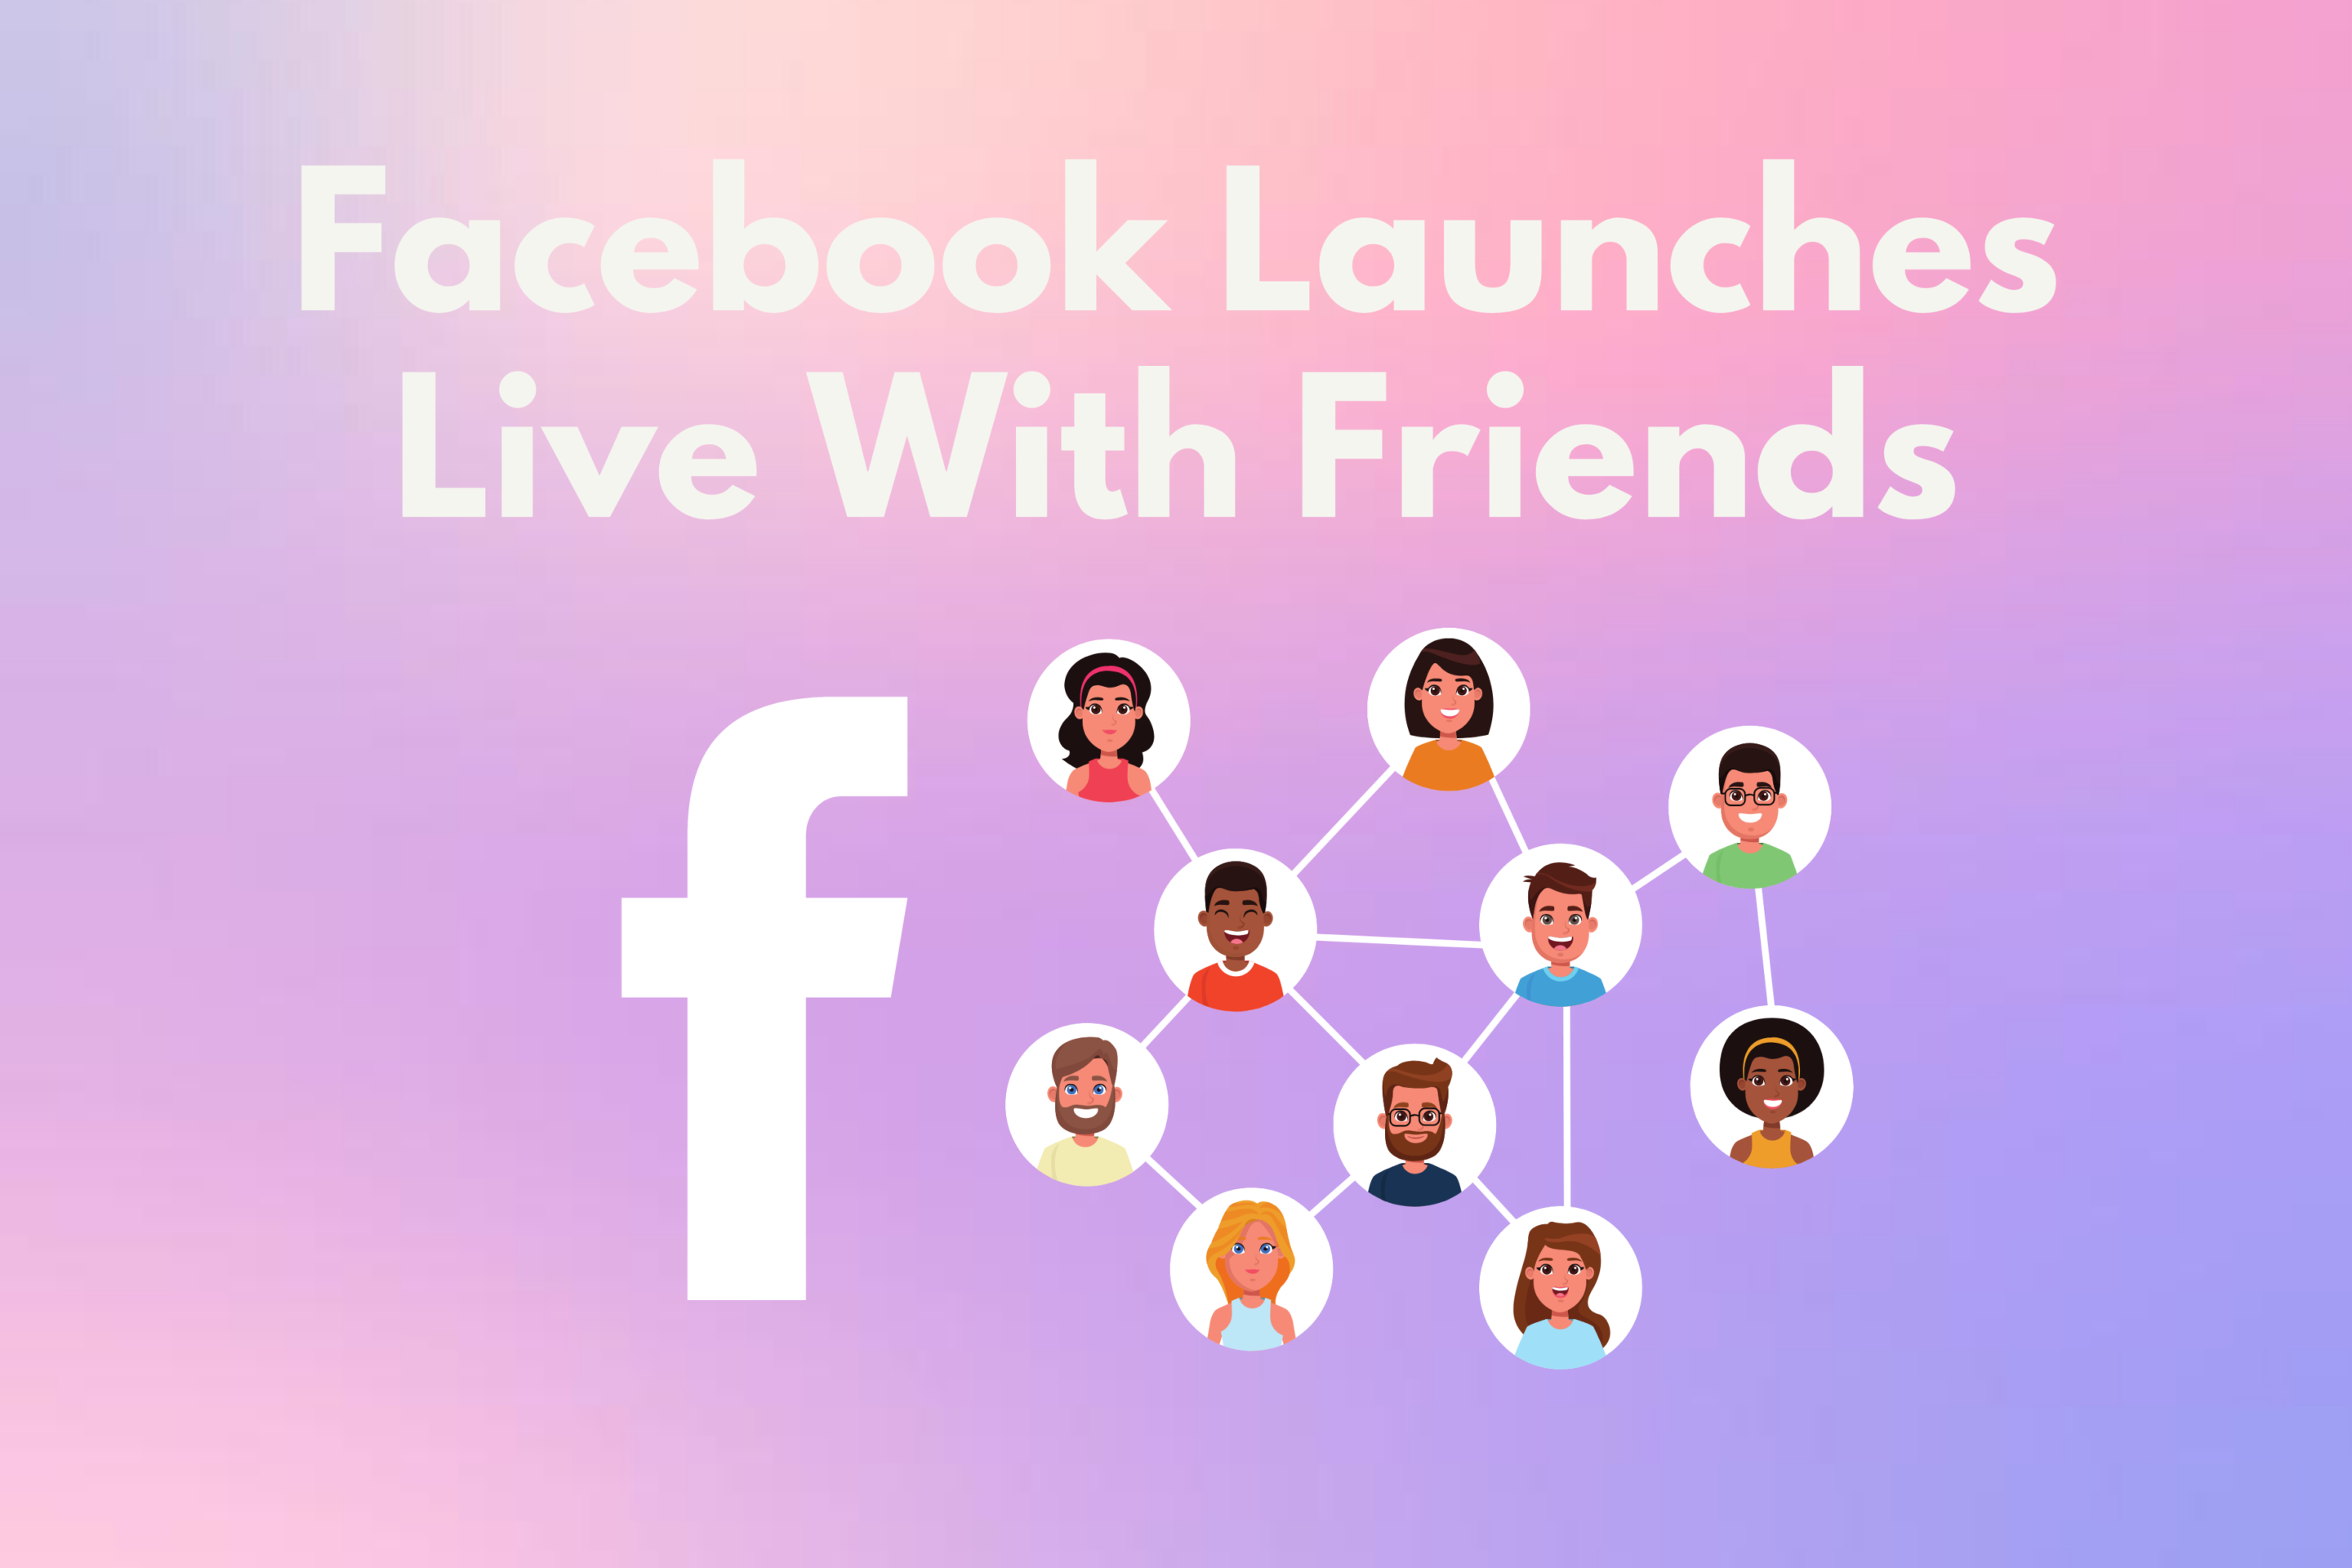 Facebook Launches Live With Friends